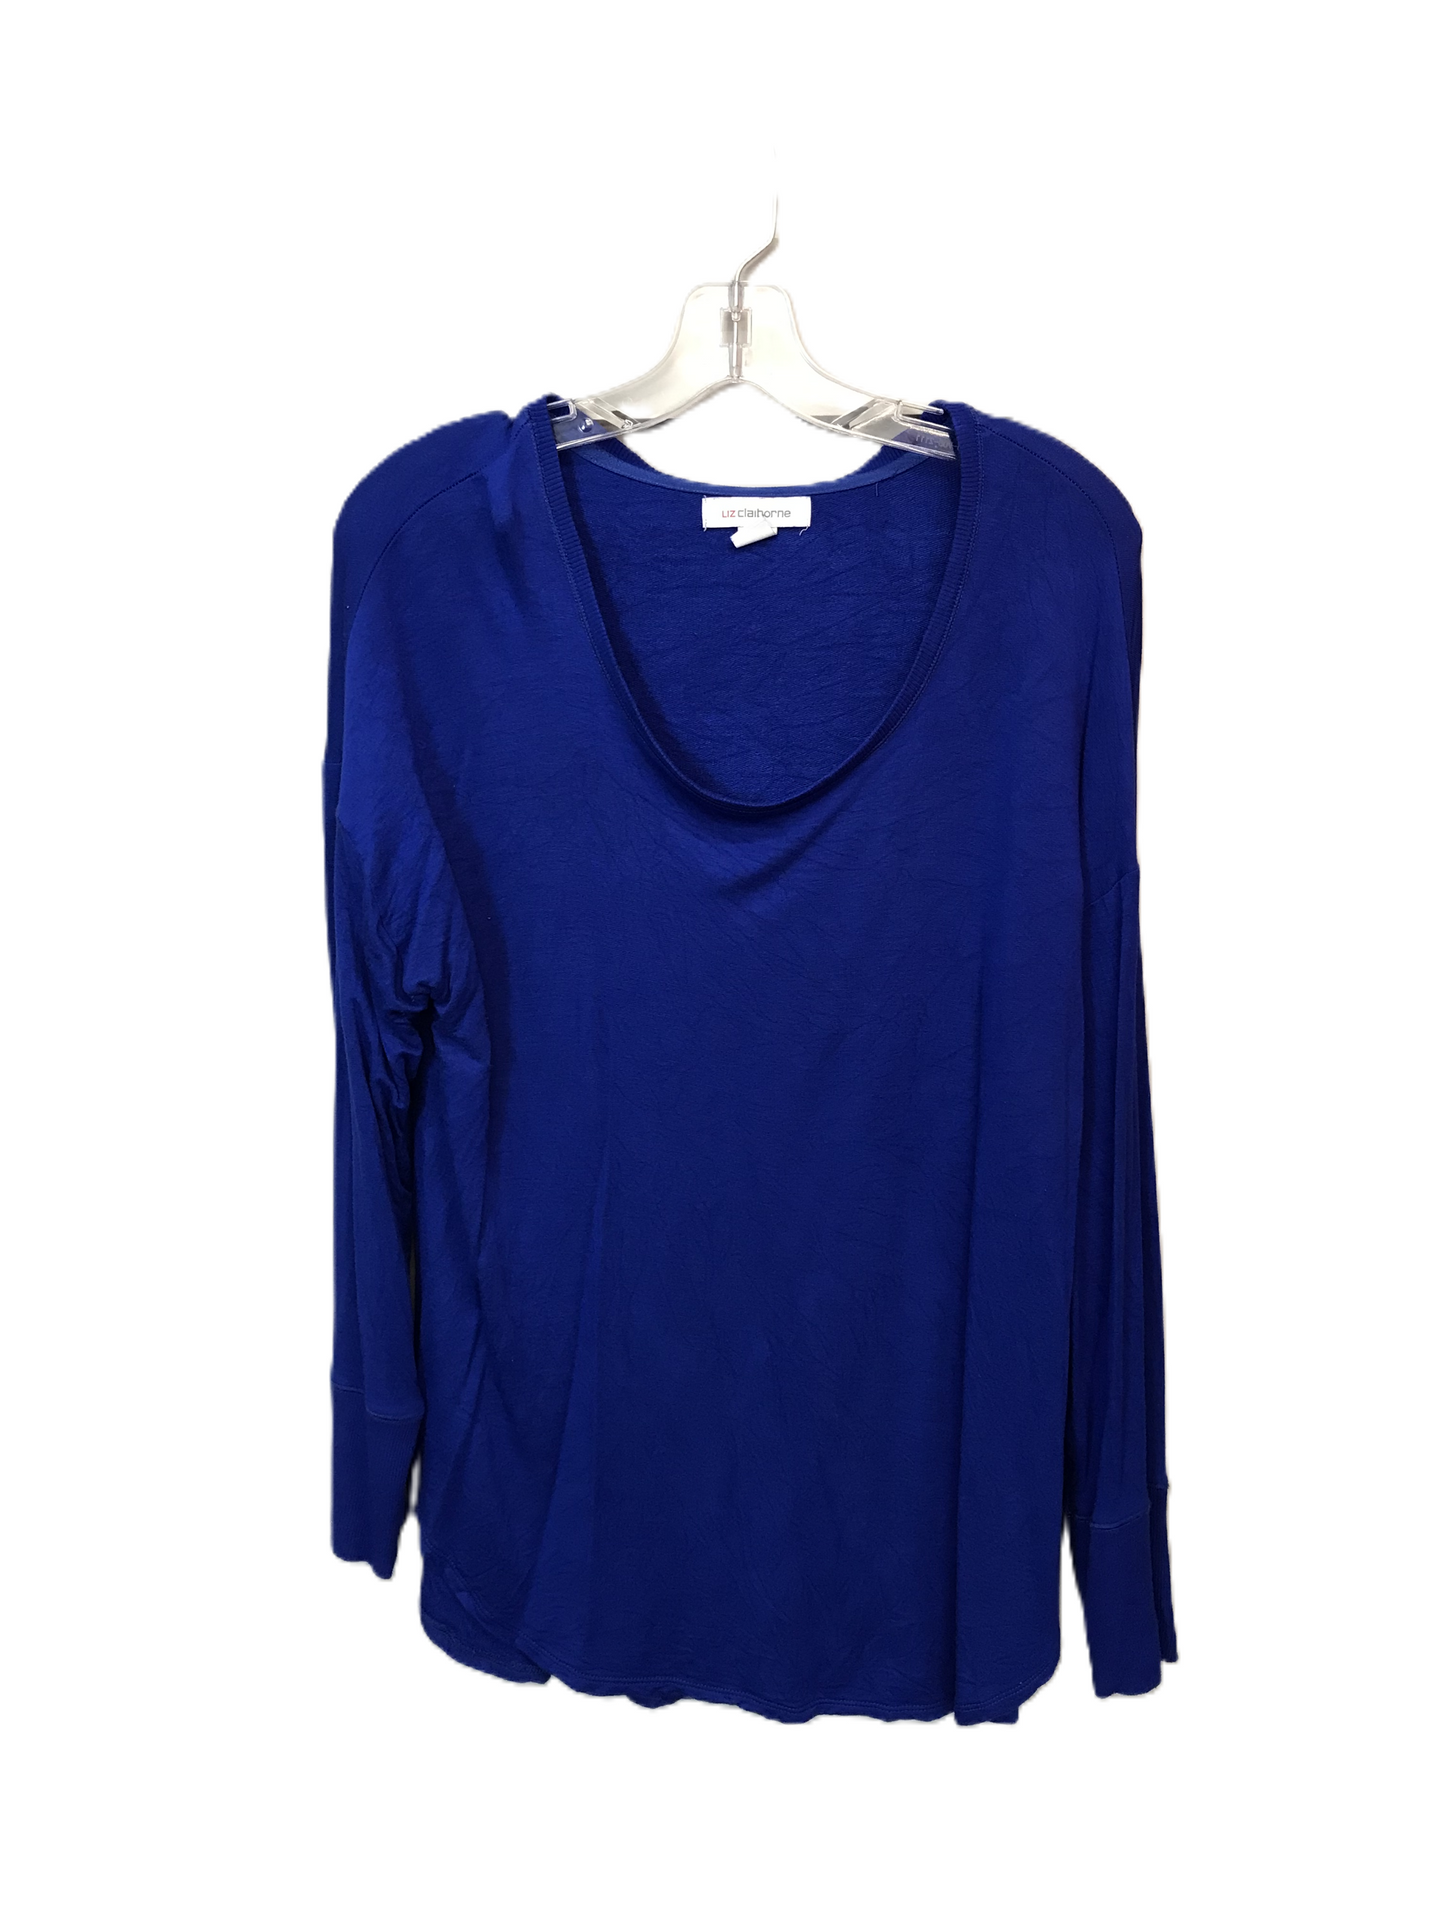 Top Long Sleeve By Liz Claiborne  Size: Large